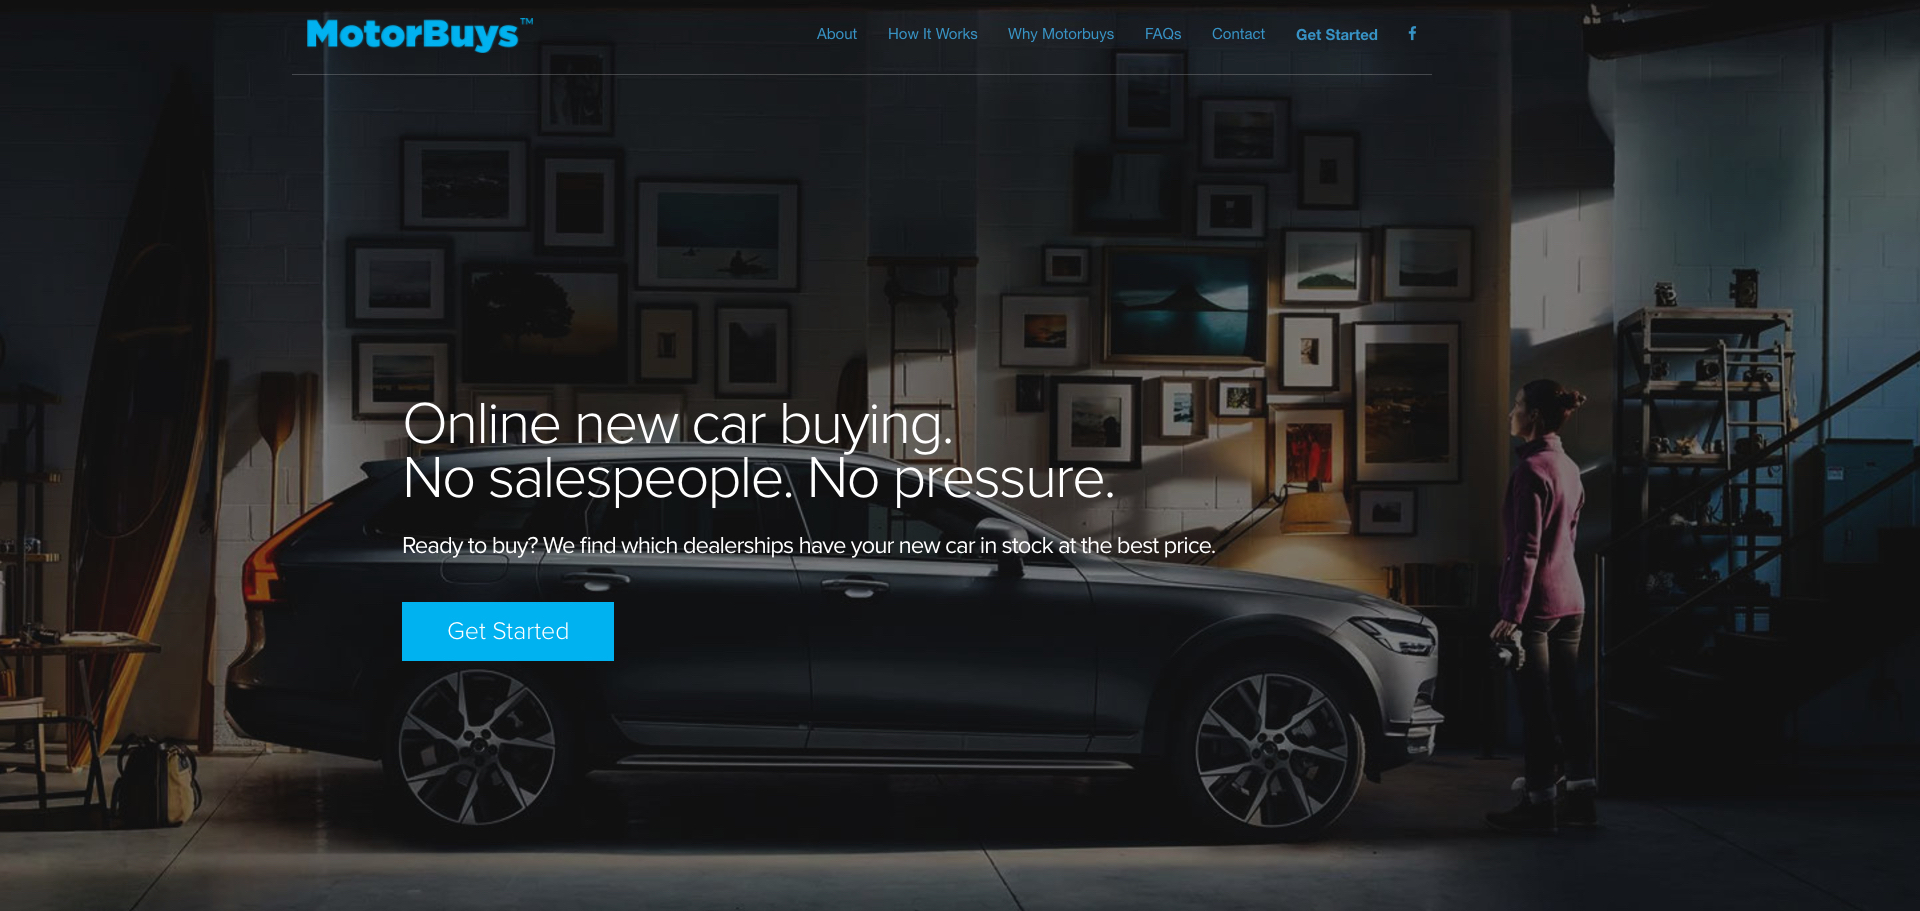 Motorbuys automated online new car buying.